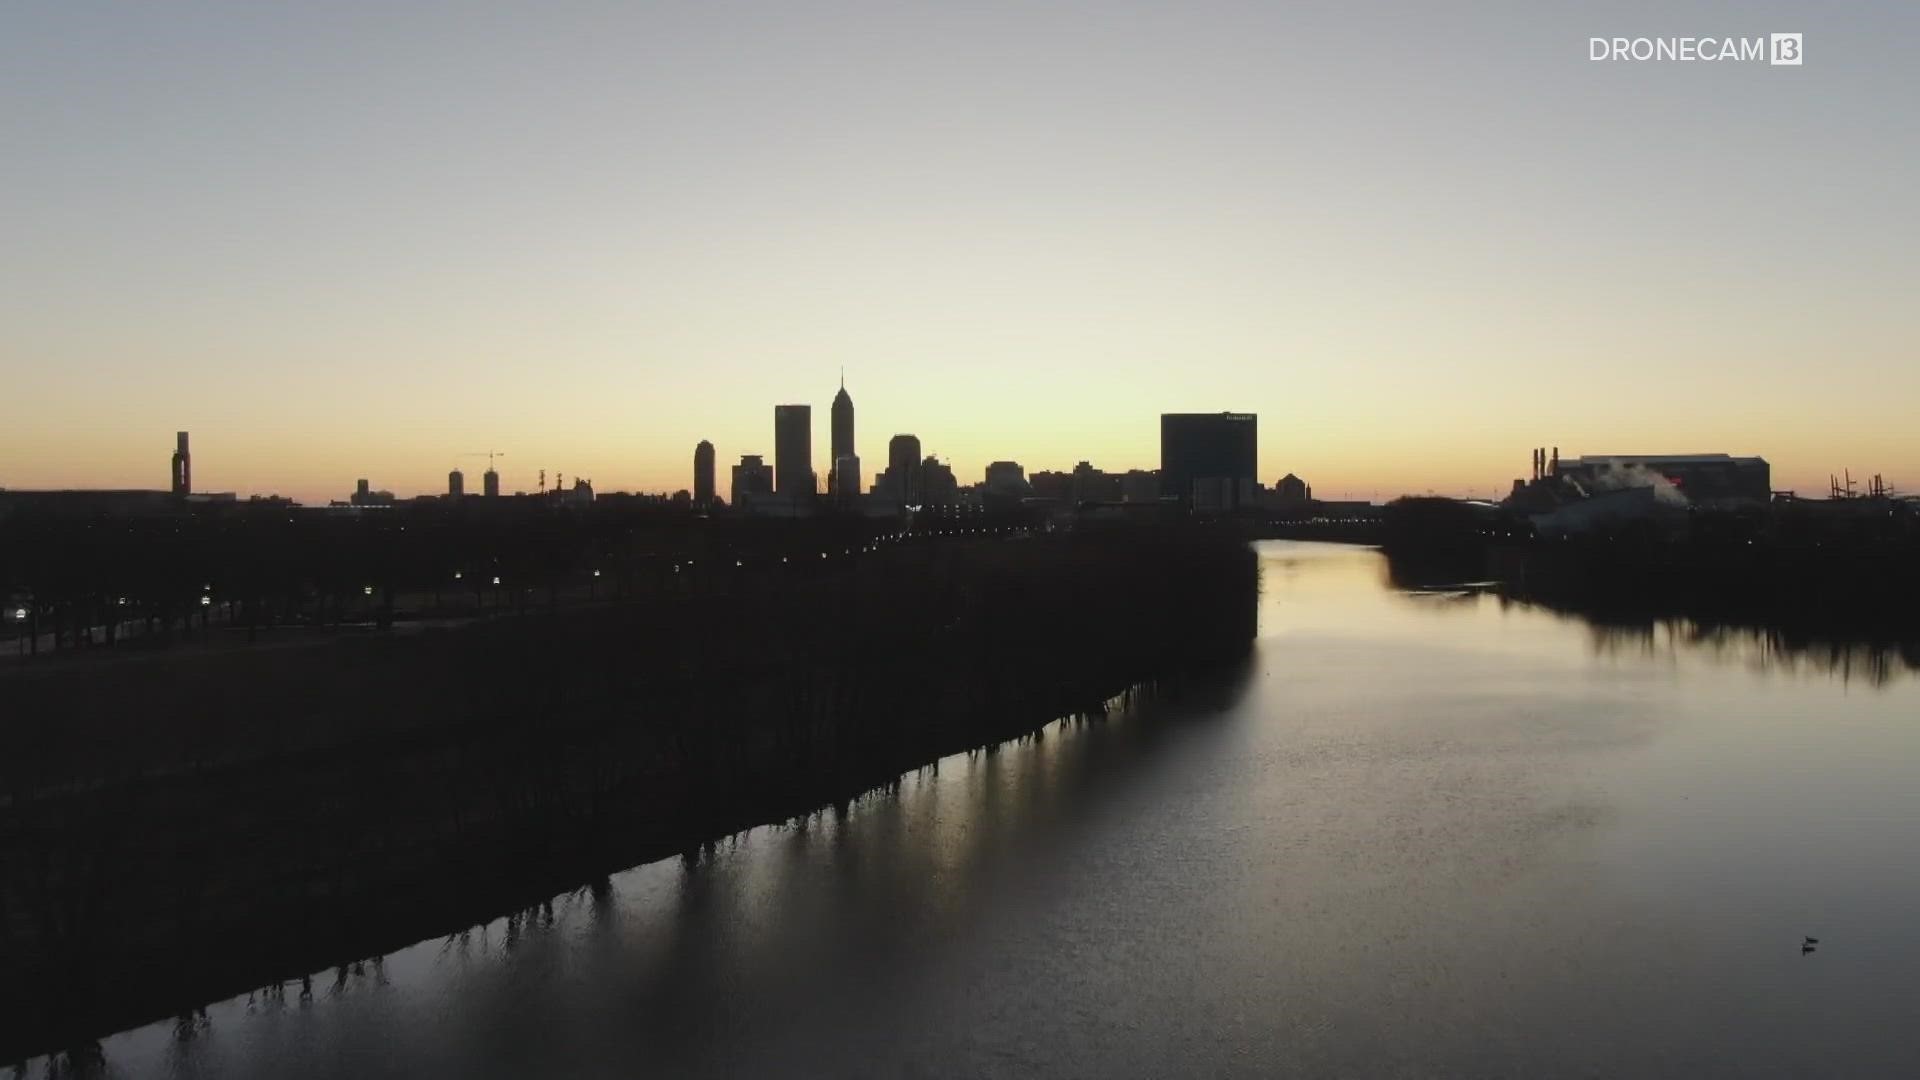 Take a look at Indy's beautiful skyline as shot from Drone Cam 13.